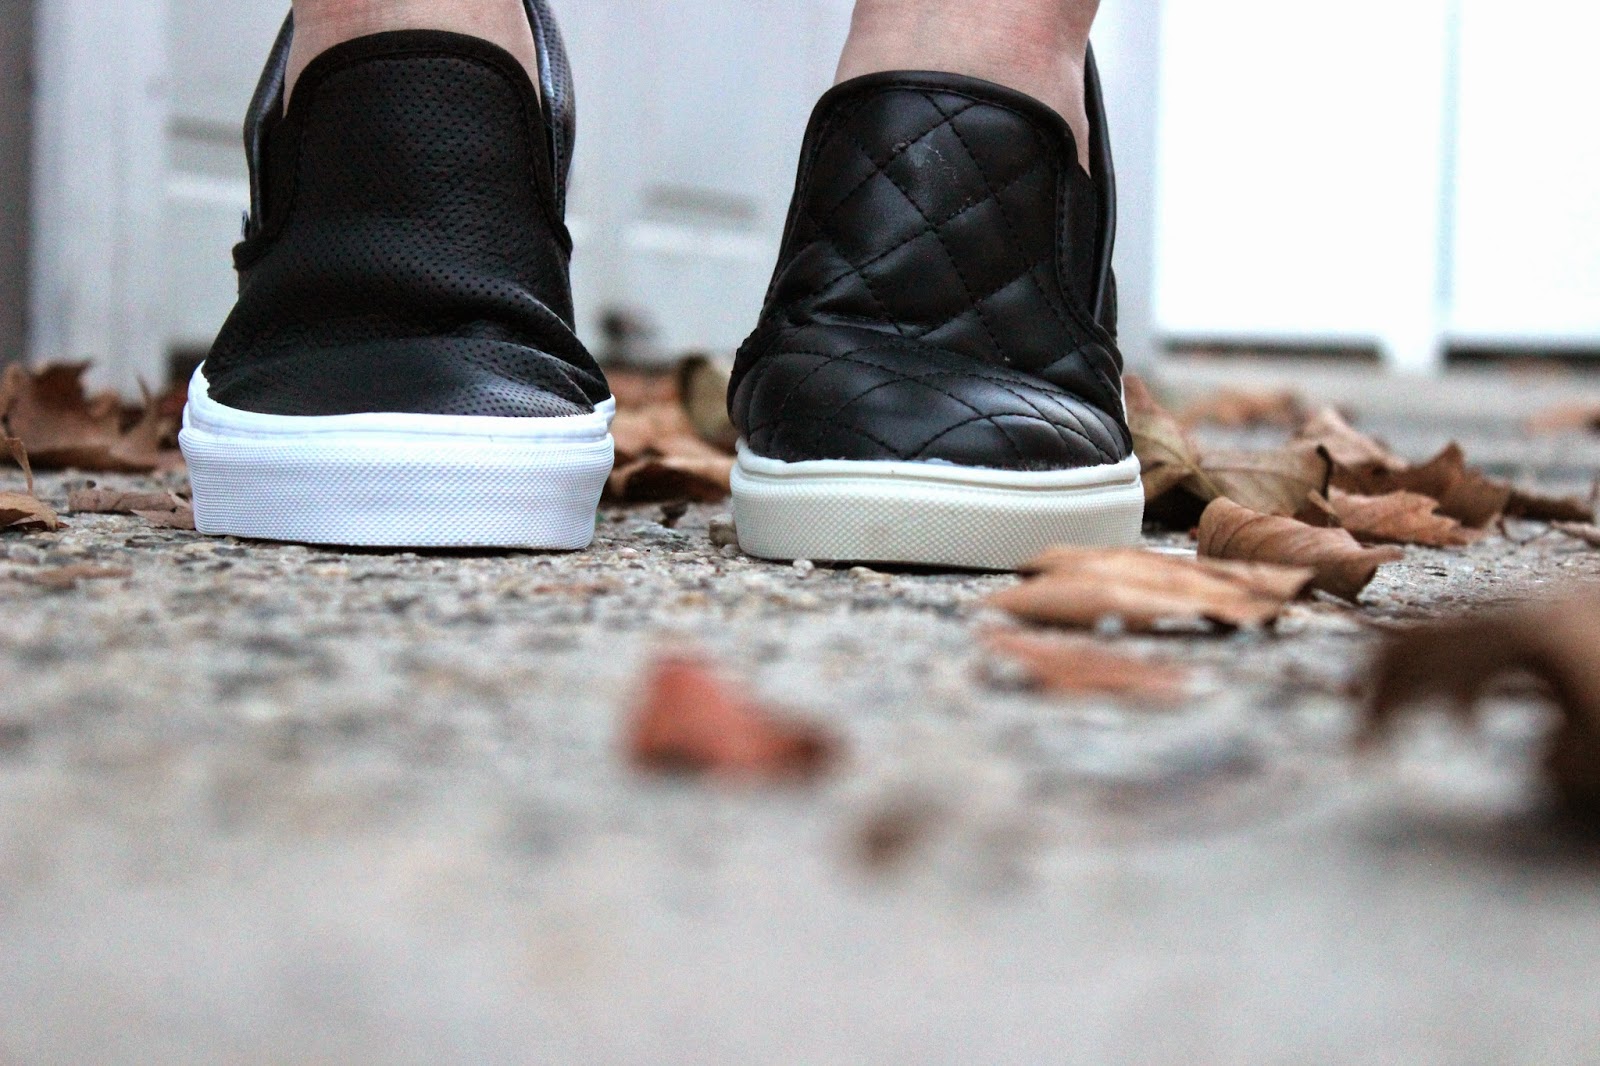 REVIEW Vans Perforated Leather Slip Ons VS Target Quilted Slip - Liz Loves